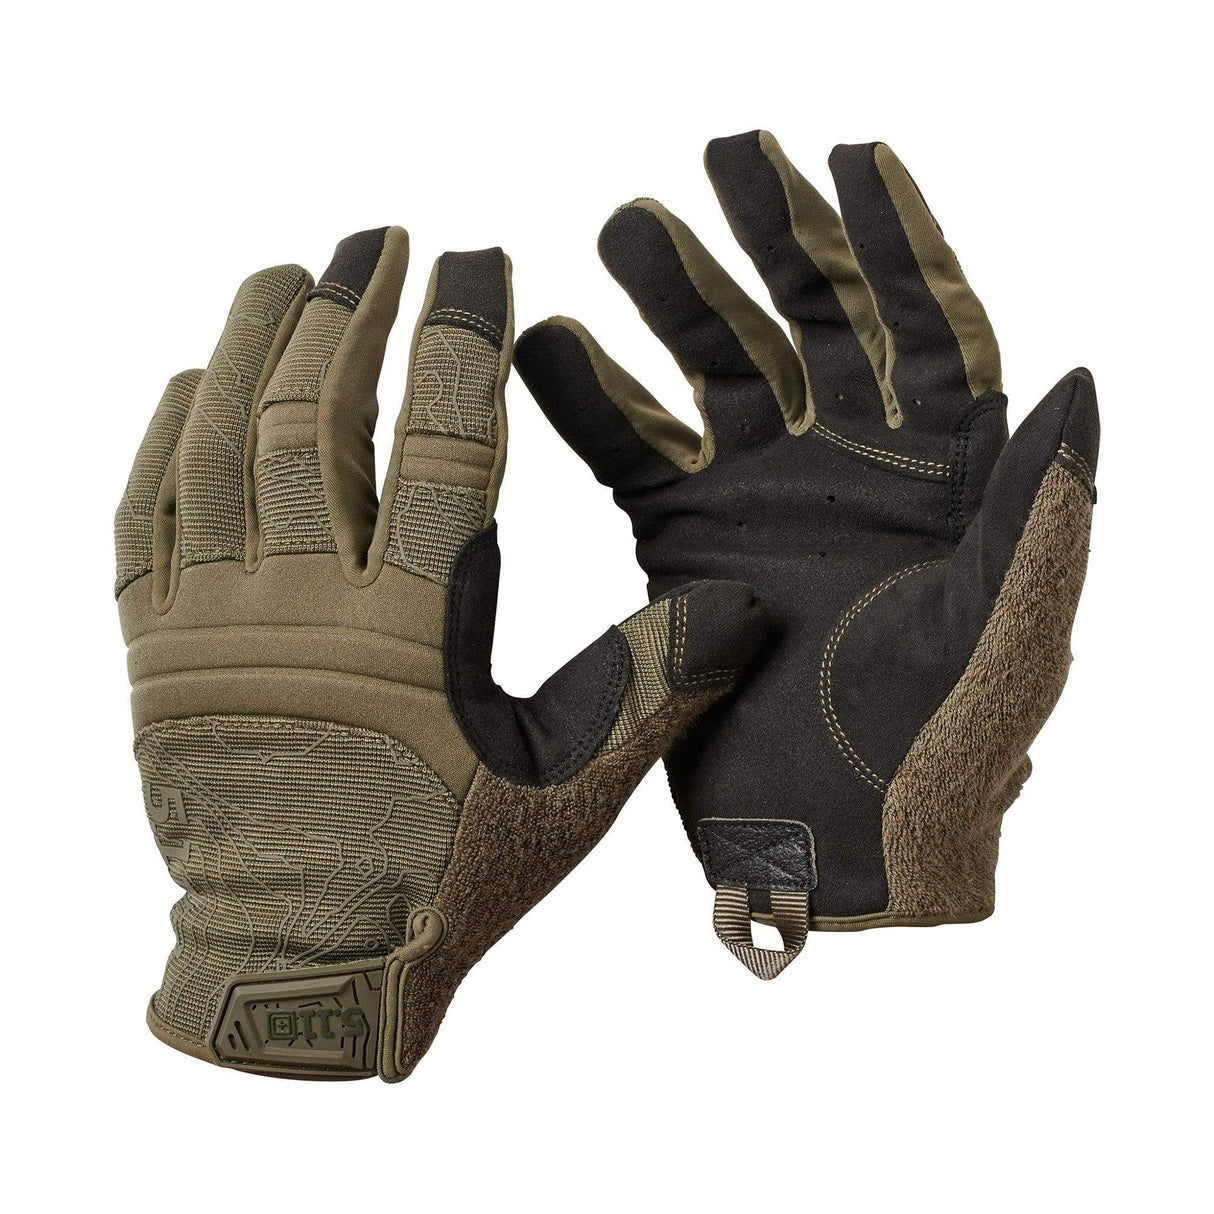 COMPETITION SHOOTING GLOVE - 5.11 Tactical Finland Store